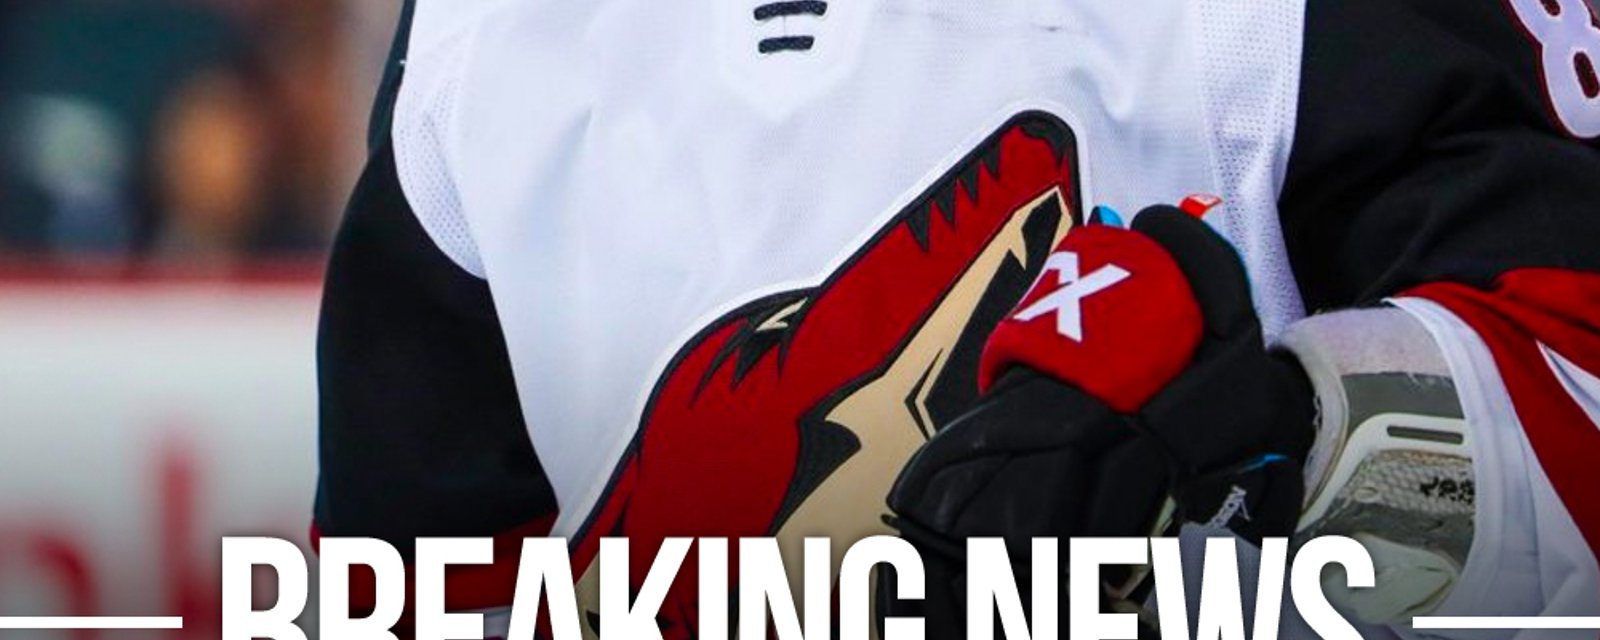 More drama with the Coyotes with surprising firing of assistant GM Steve Sullivan